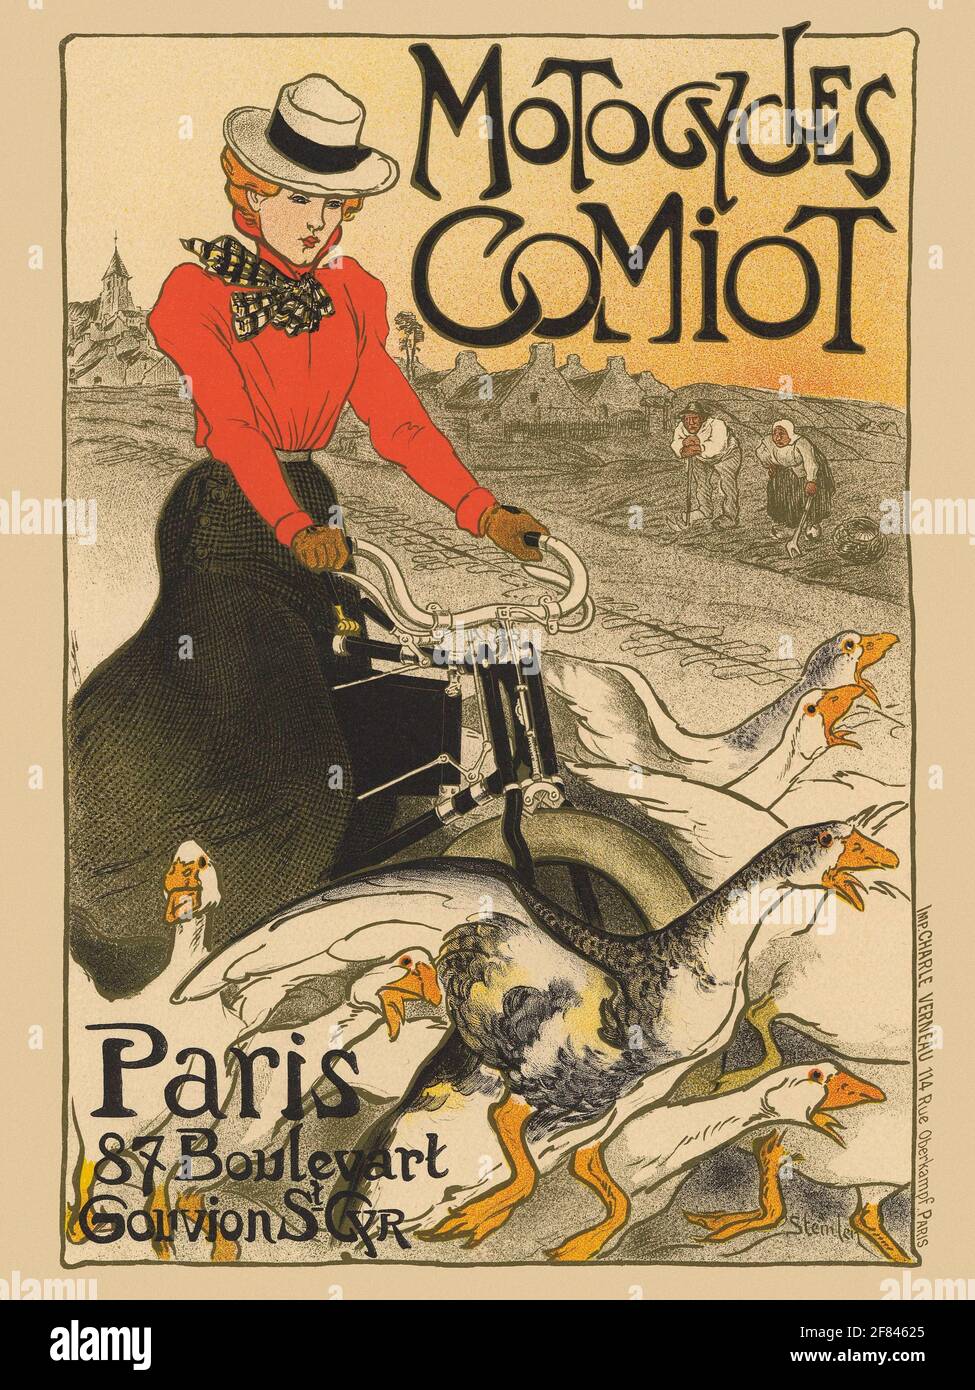 Restored vintage advertising poster. Motocycles Comiot by Théophile Alexandre Steinlen (1859-1923), France. Poster published 1899. Stock Photo